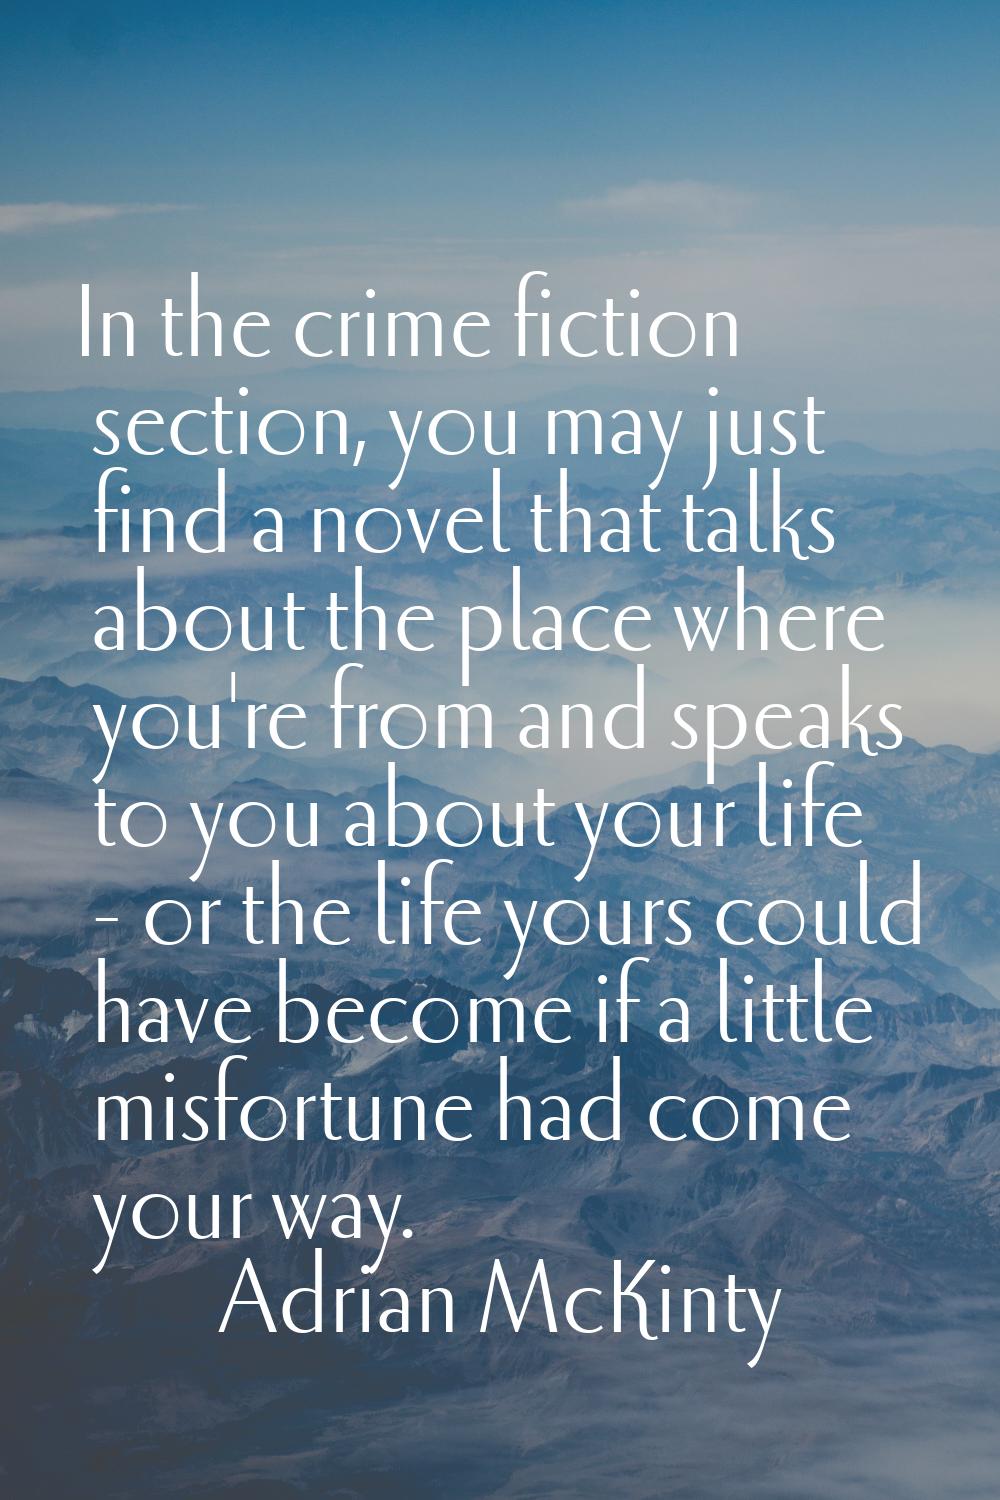 In the crime fiction section, you may just find a novel that talks about the place where you're fro